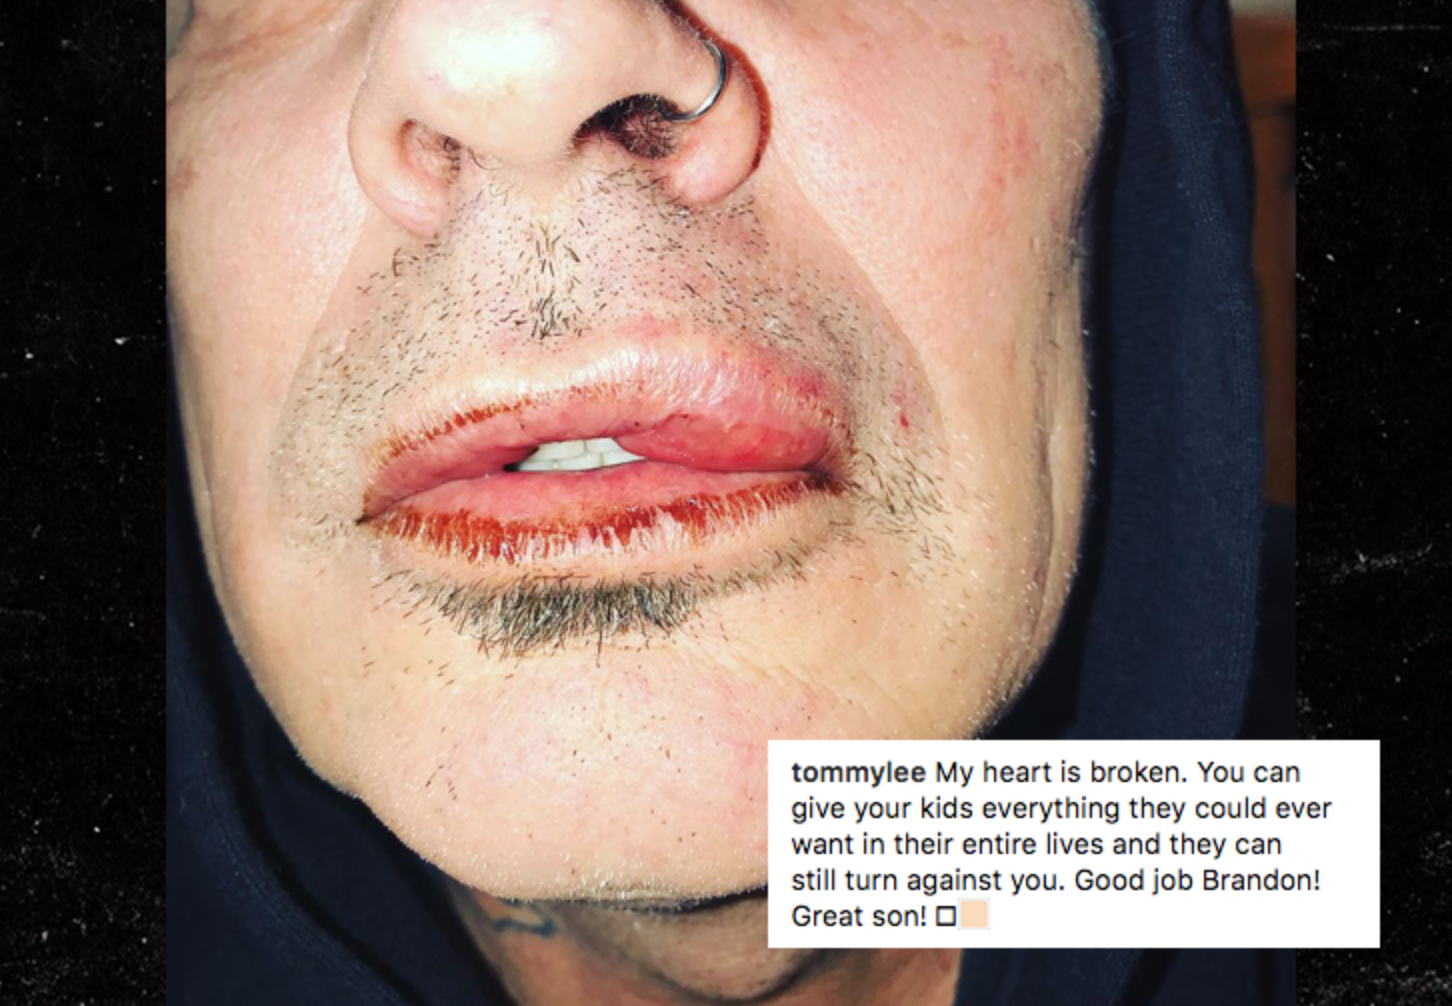 Tommy Lee says he was assaulted by his son | Metal Insider